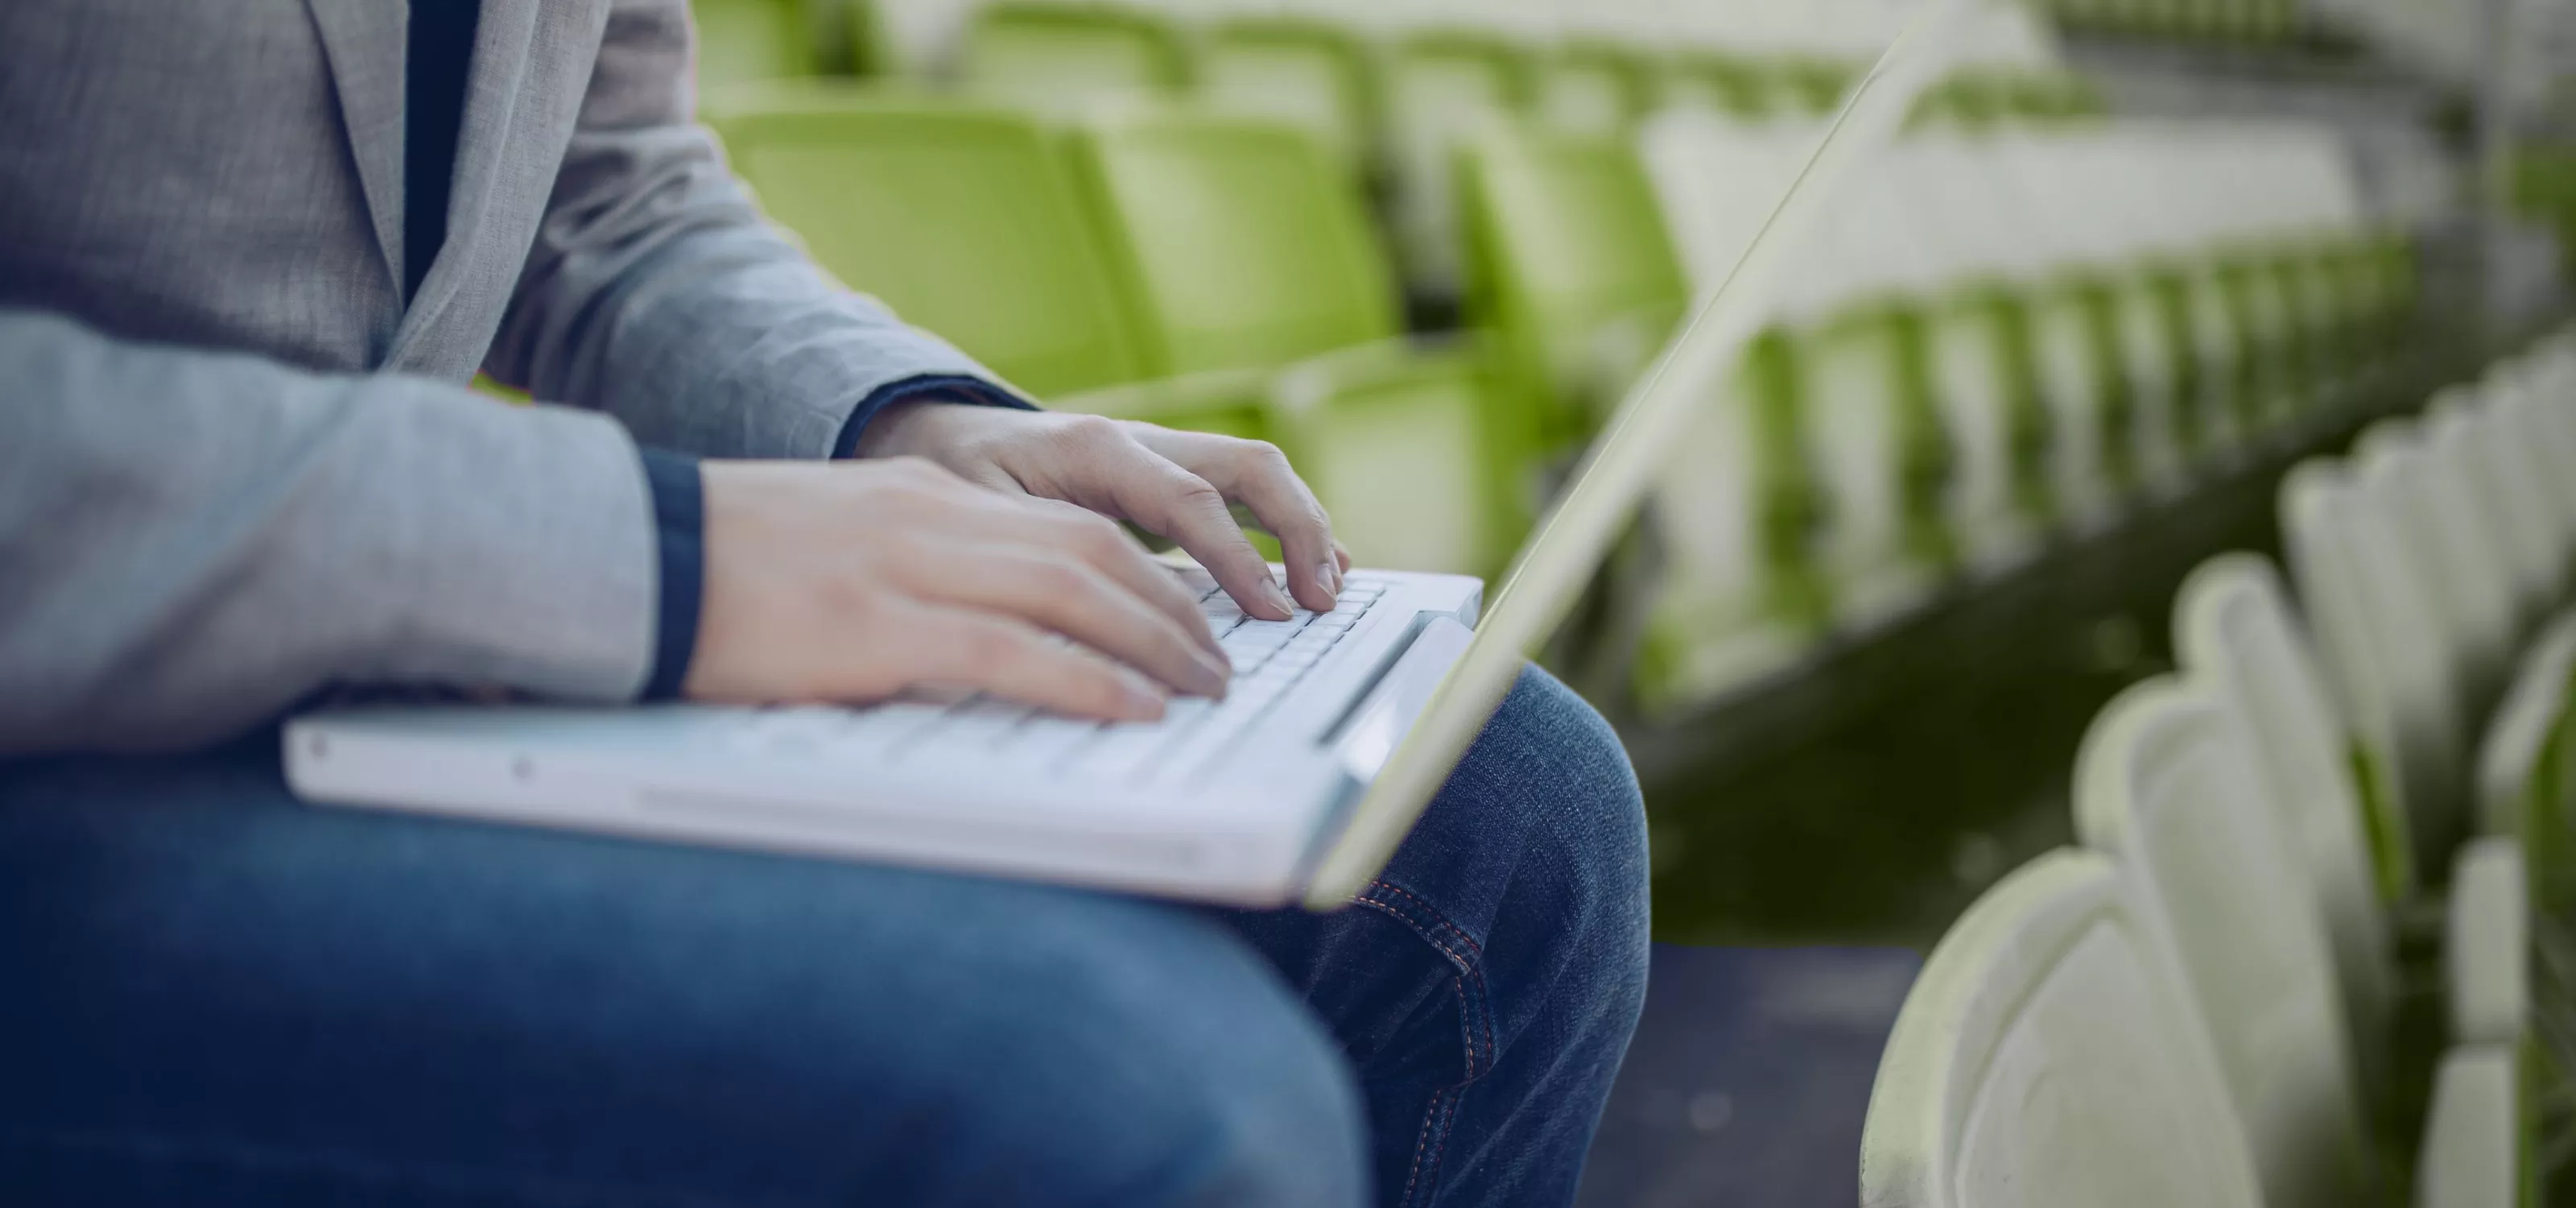 Person on a laptop seated in gymnasium seating.